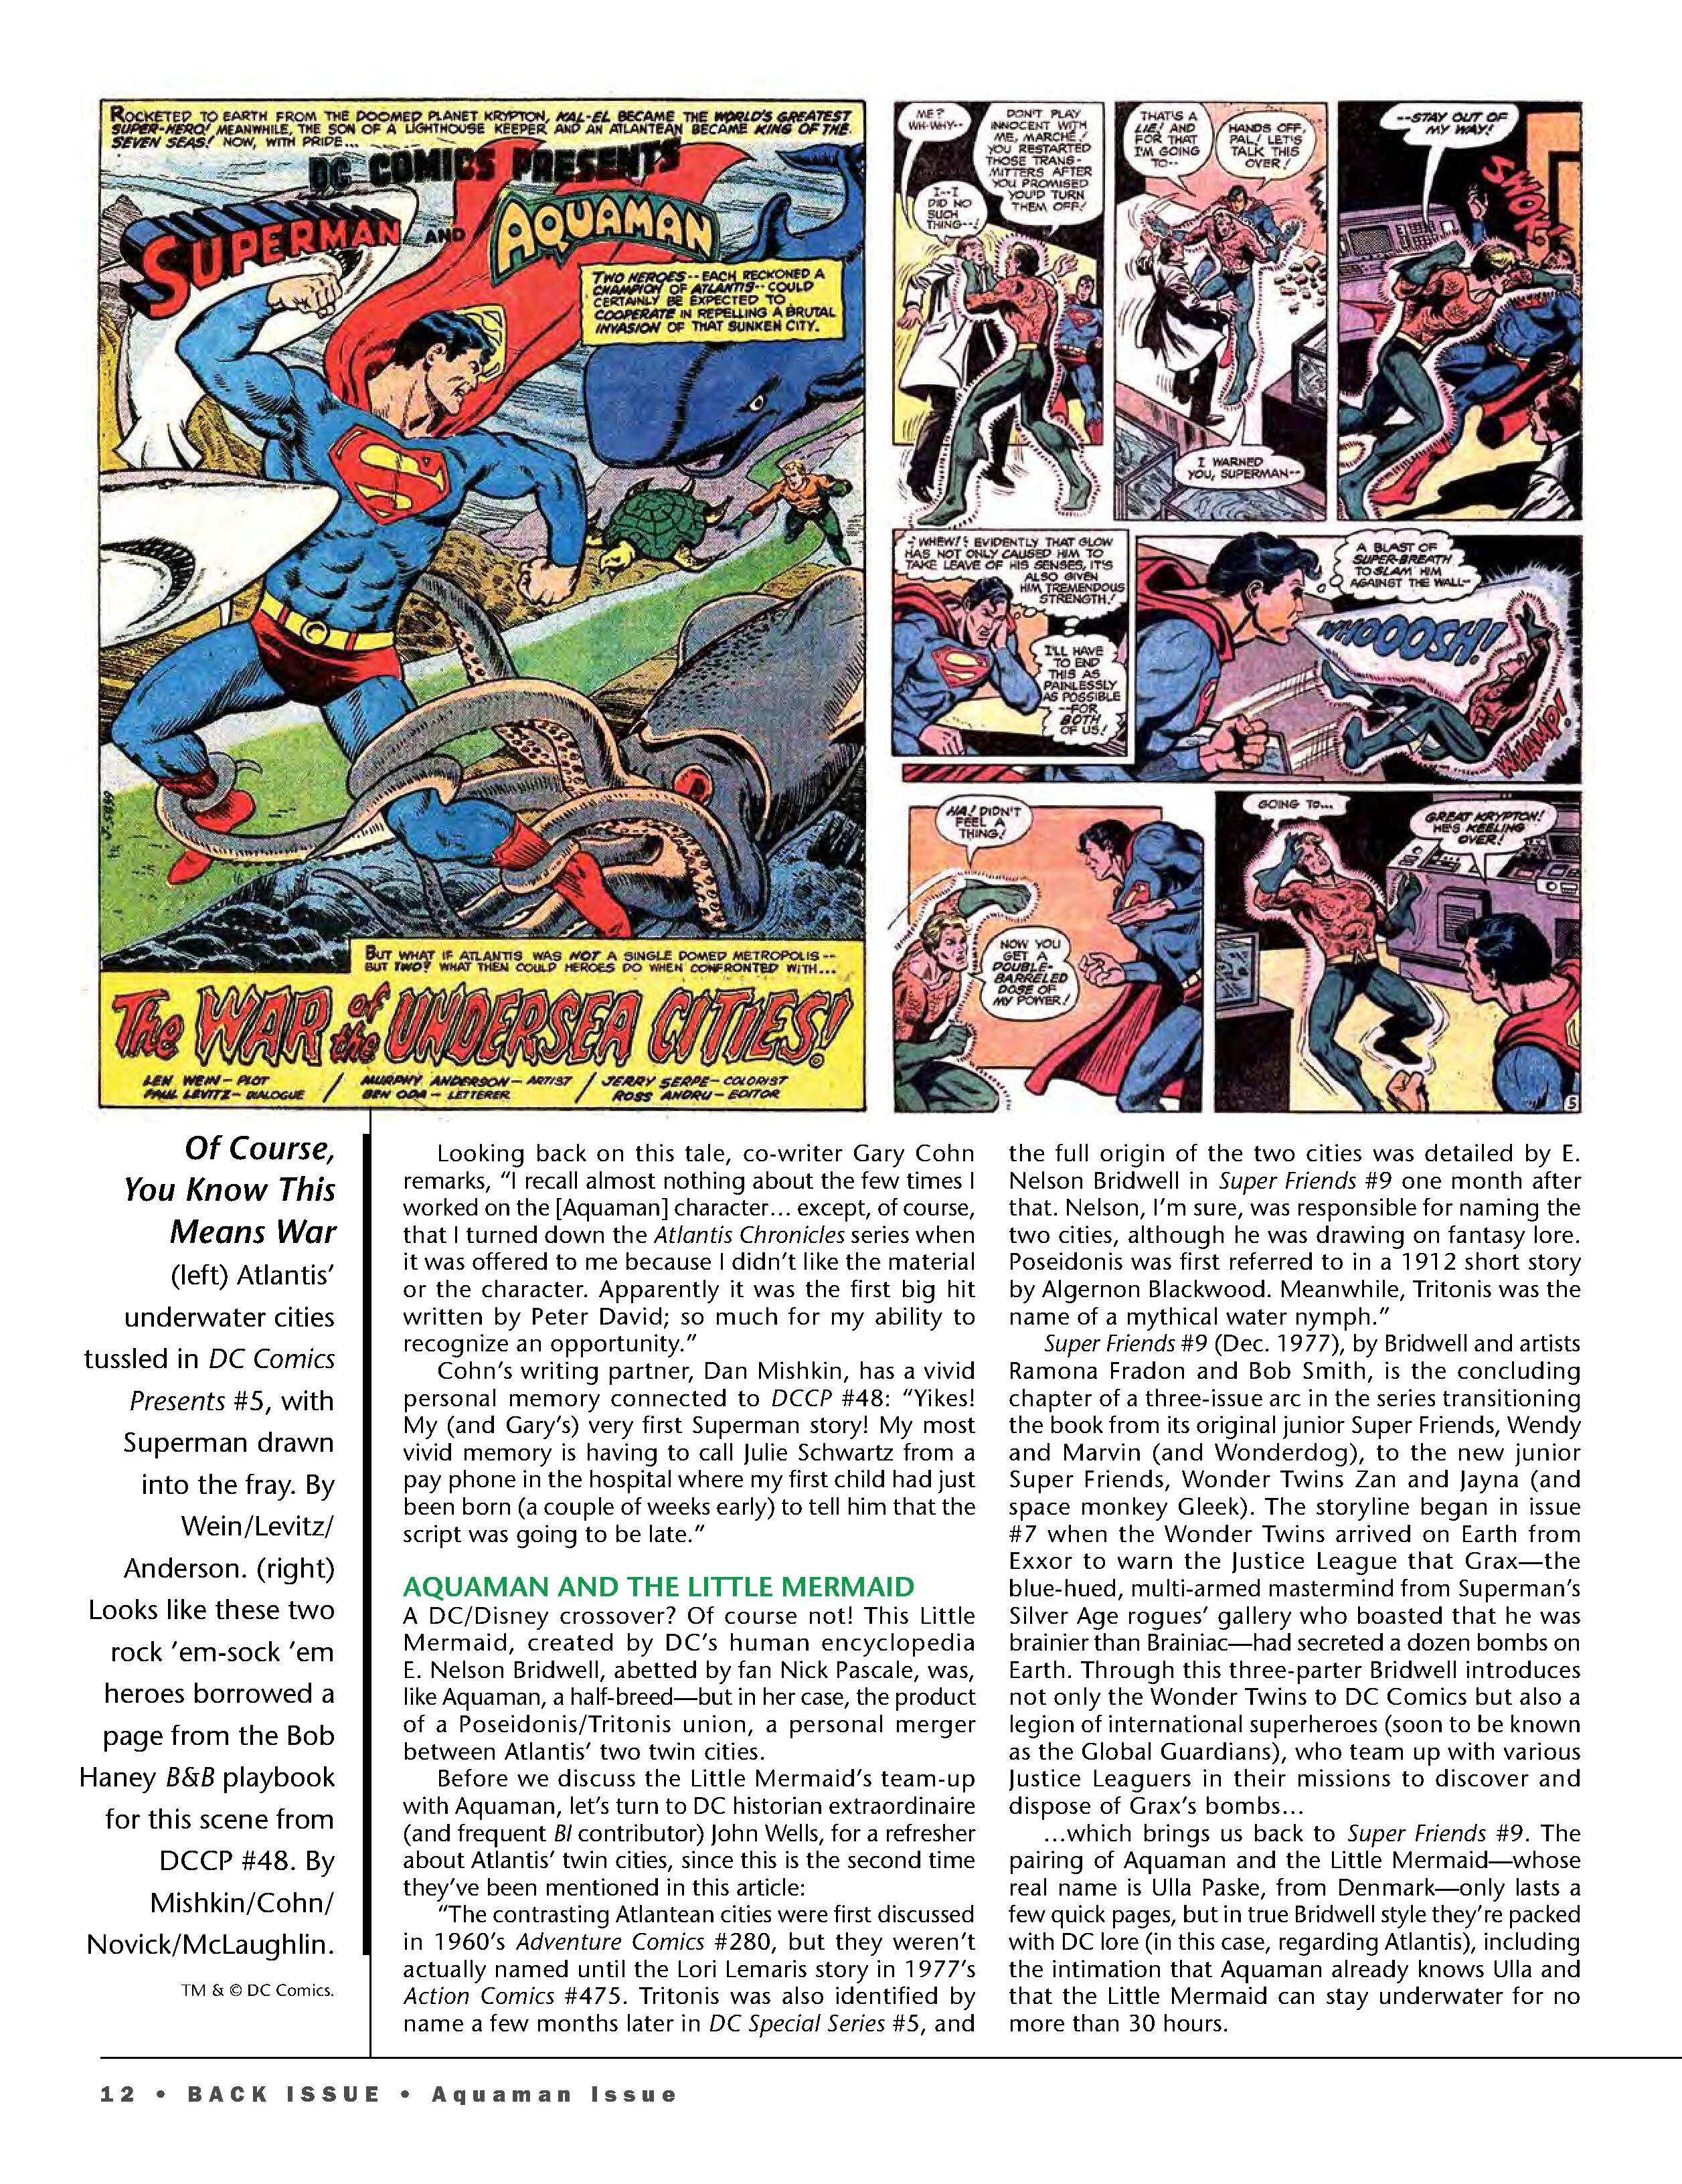 Read online Back Issue comic -  Issue #108 - 14